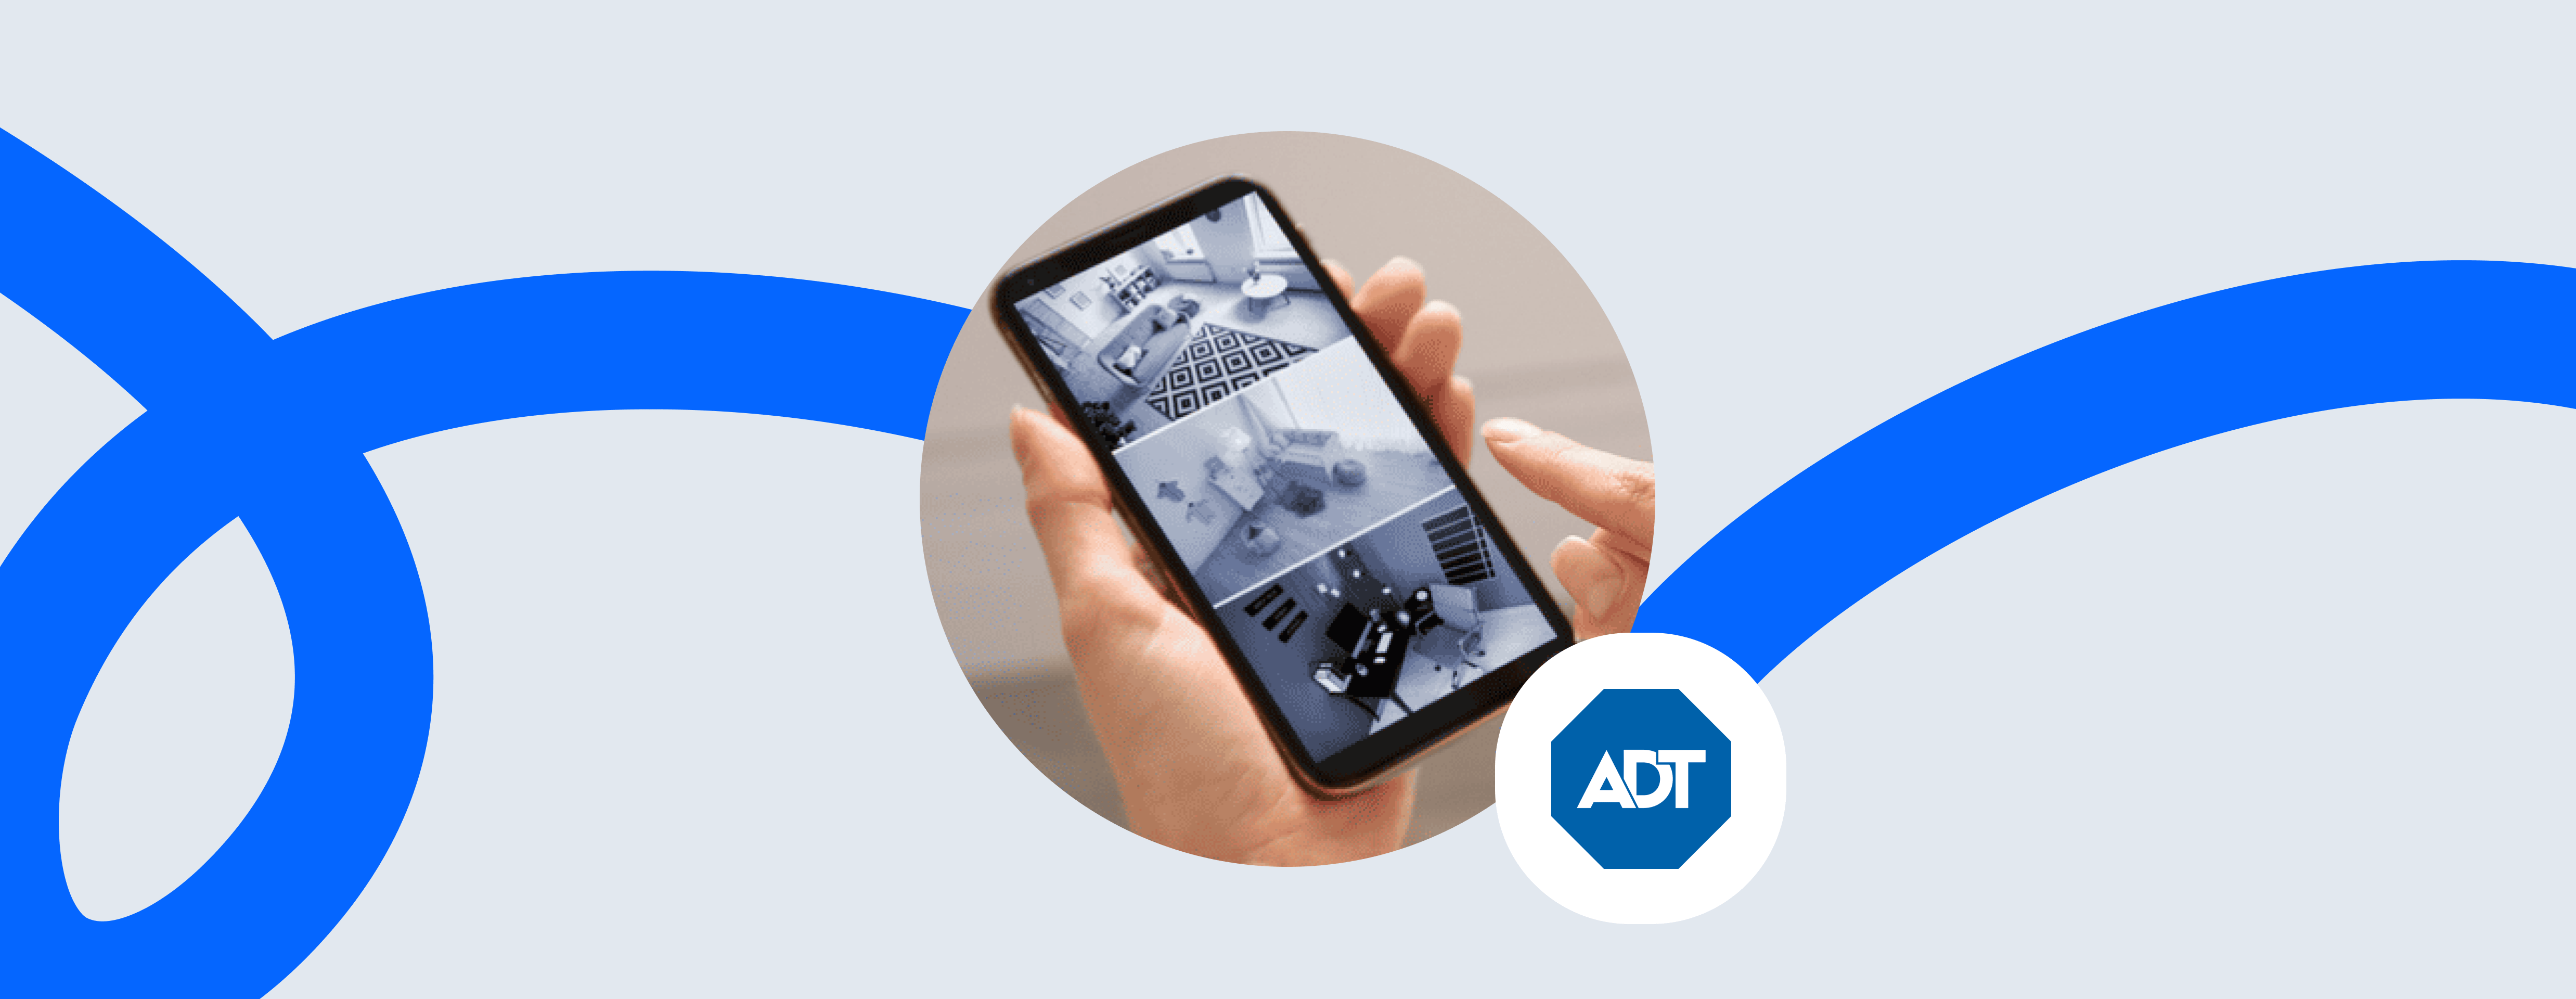 adt security casestudy cover image